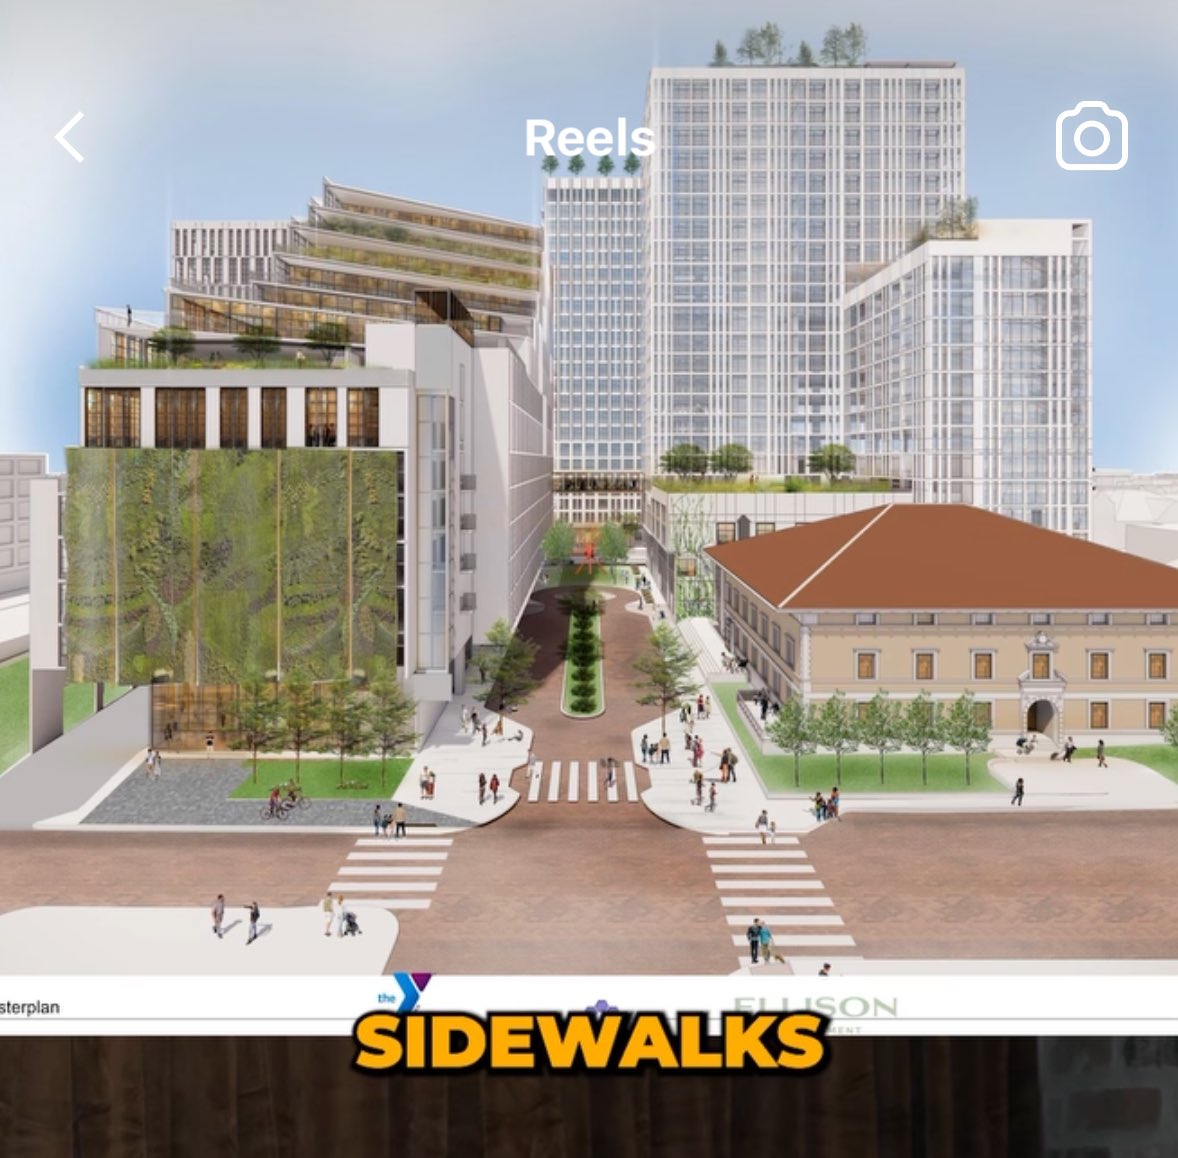 Even Tampa FL plans on making their downtown walkable in the near future. #Peekskill deserves walkability